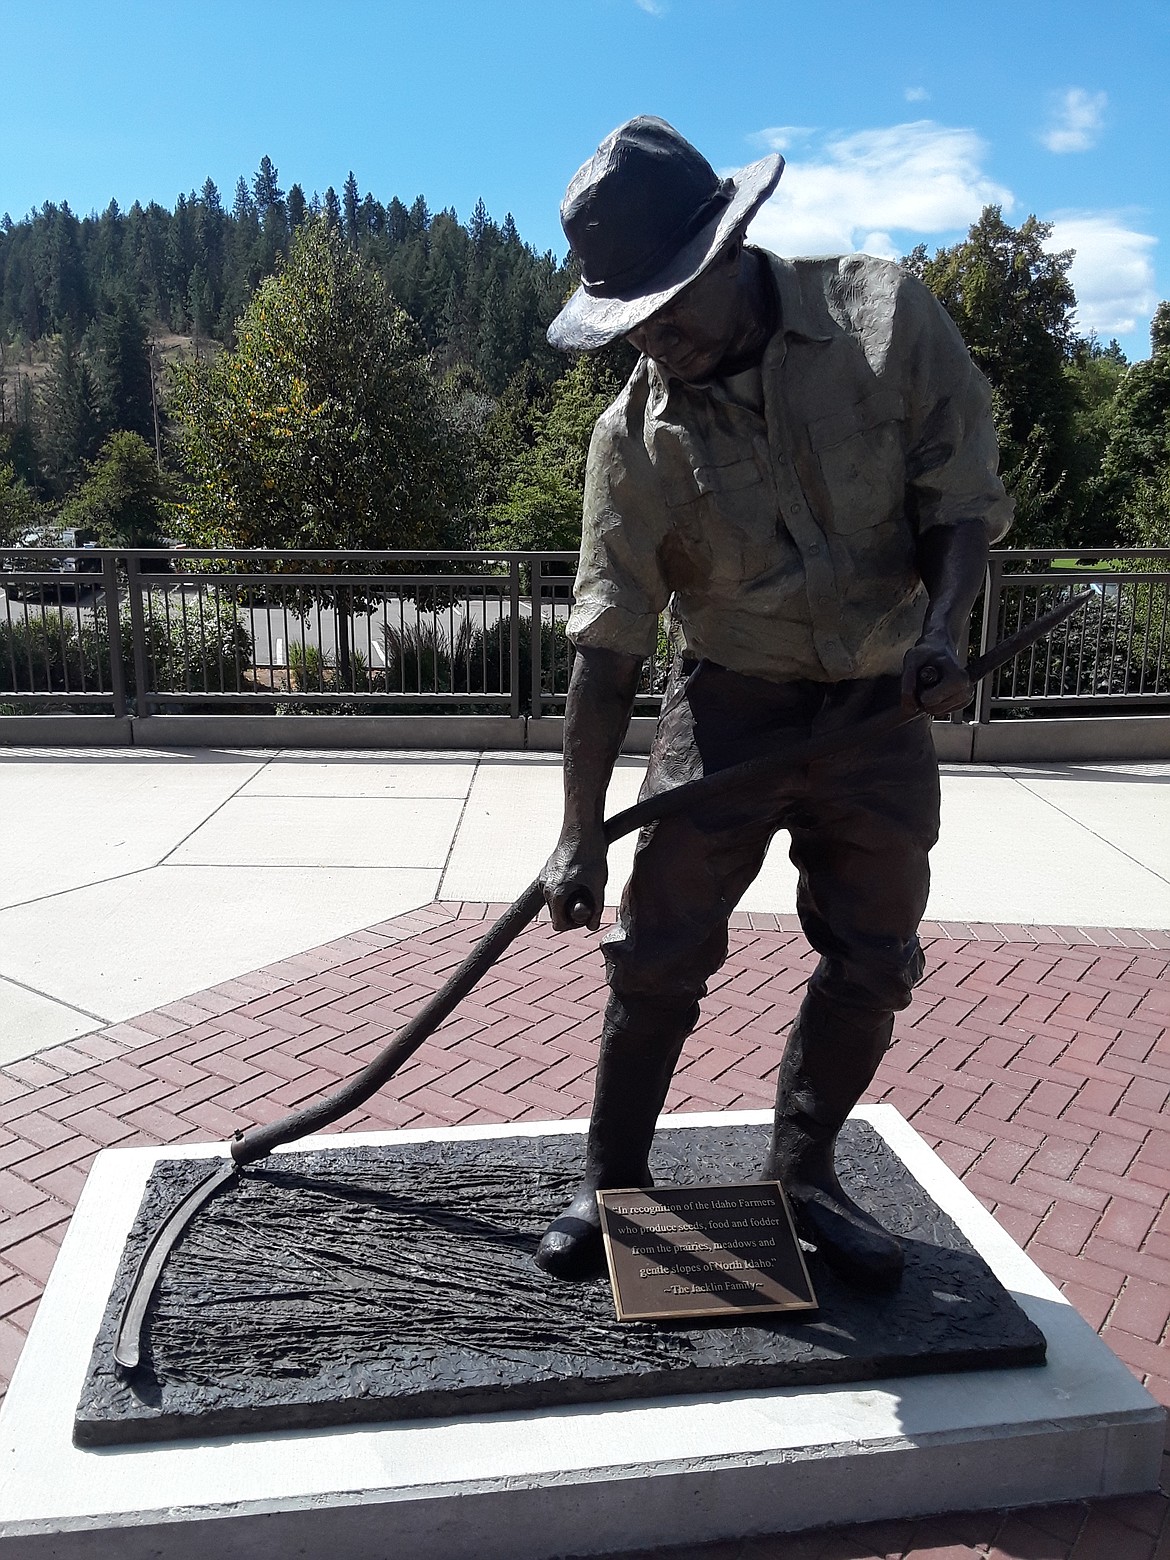 Terry Lee’s “The Idaho Farmer” is one of three statues he created that stand along Front Street in Coeur d’Alene, telling the history of the people who built the West we see today. Alongside “The Idaho Farmer,” “The Idaho Lumberjack” and “The Working Man,” Lee’s newest installment — “The Suffragist” — will be installed Aug. 18. (CRAIG NORTHRUP/Press)